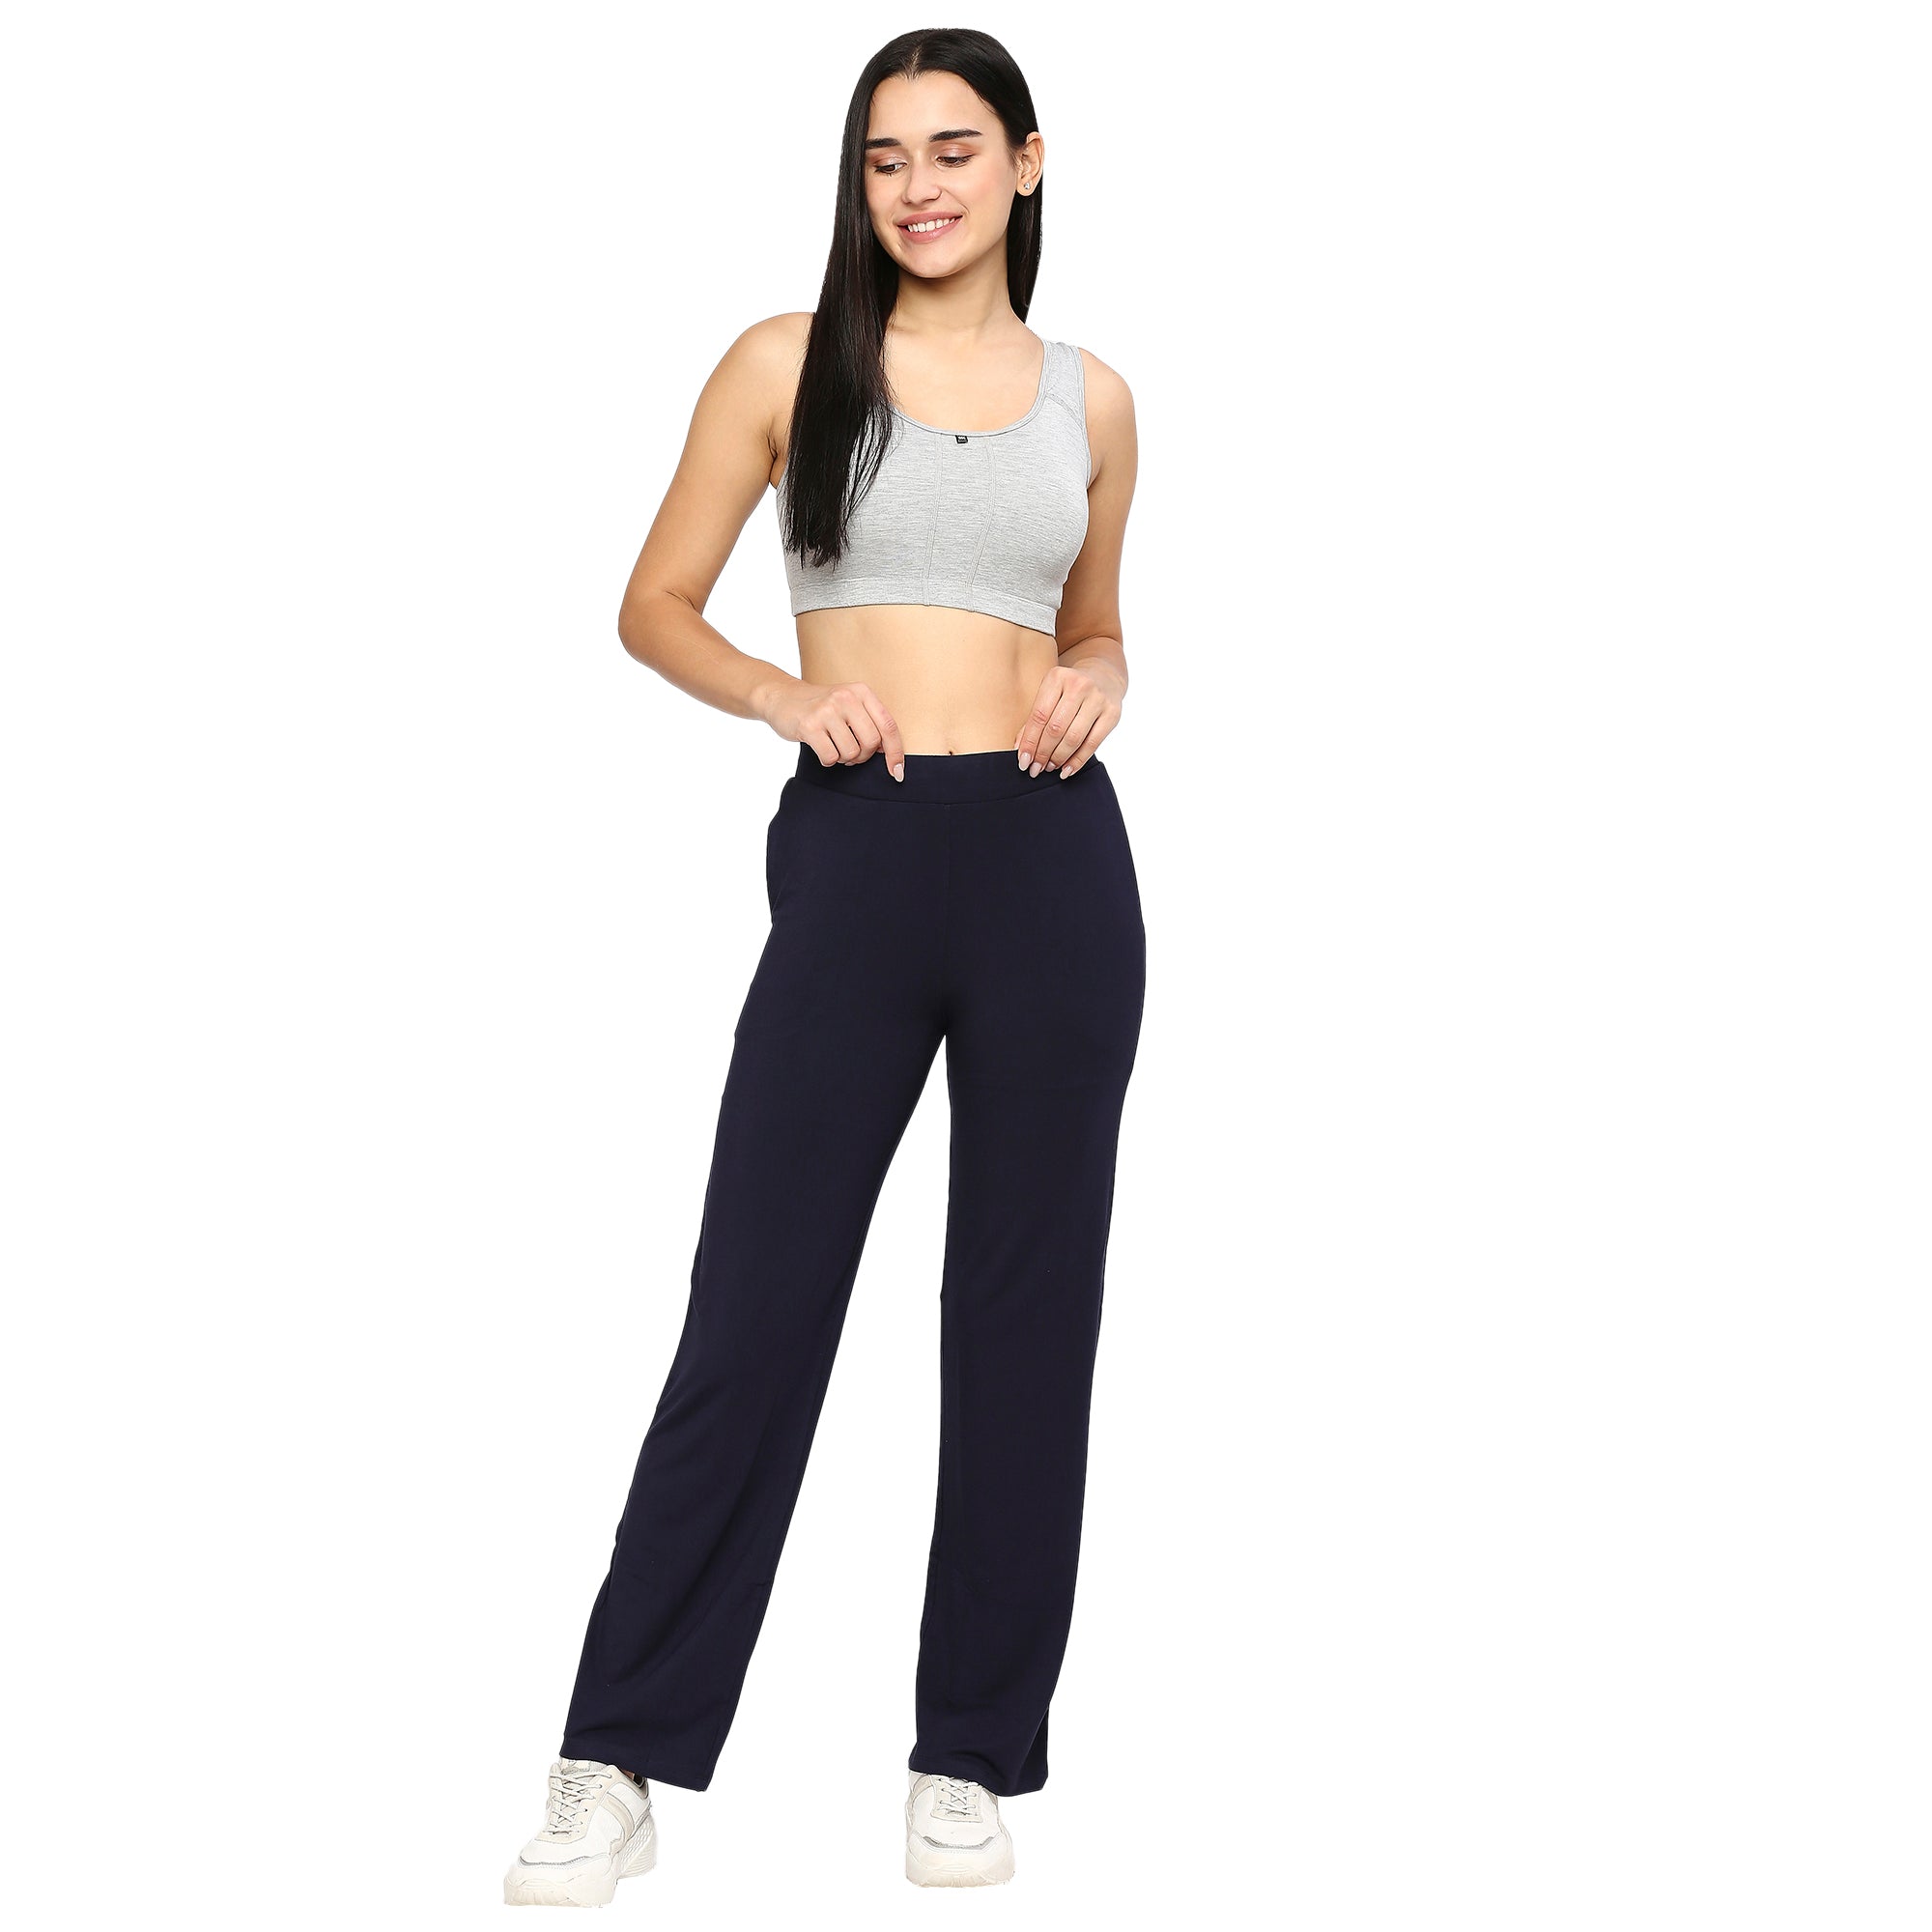 Trendyol Women HighRise Straight Fit Cotton Parallel Trousers Price in  India Full Specifications  Offers  DTashioncom